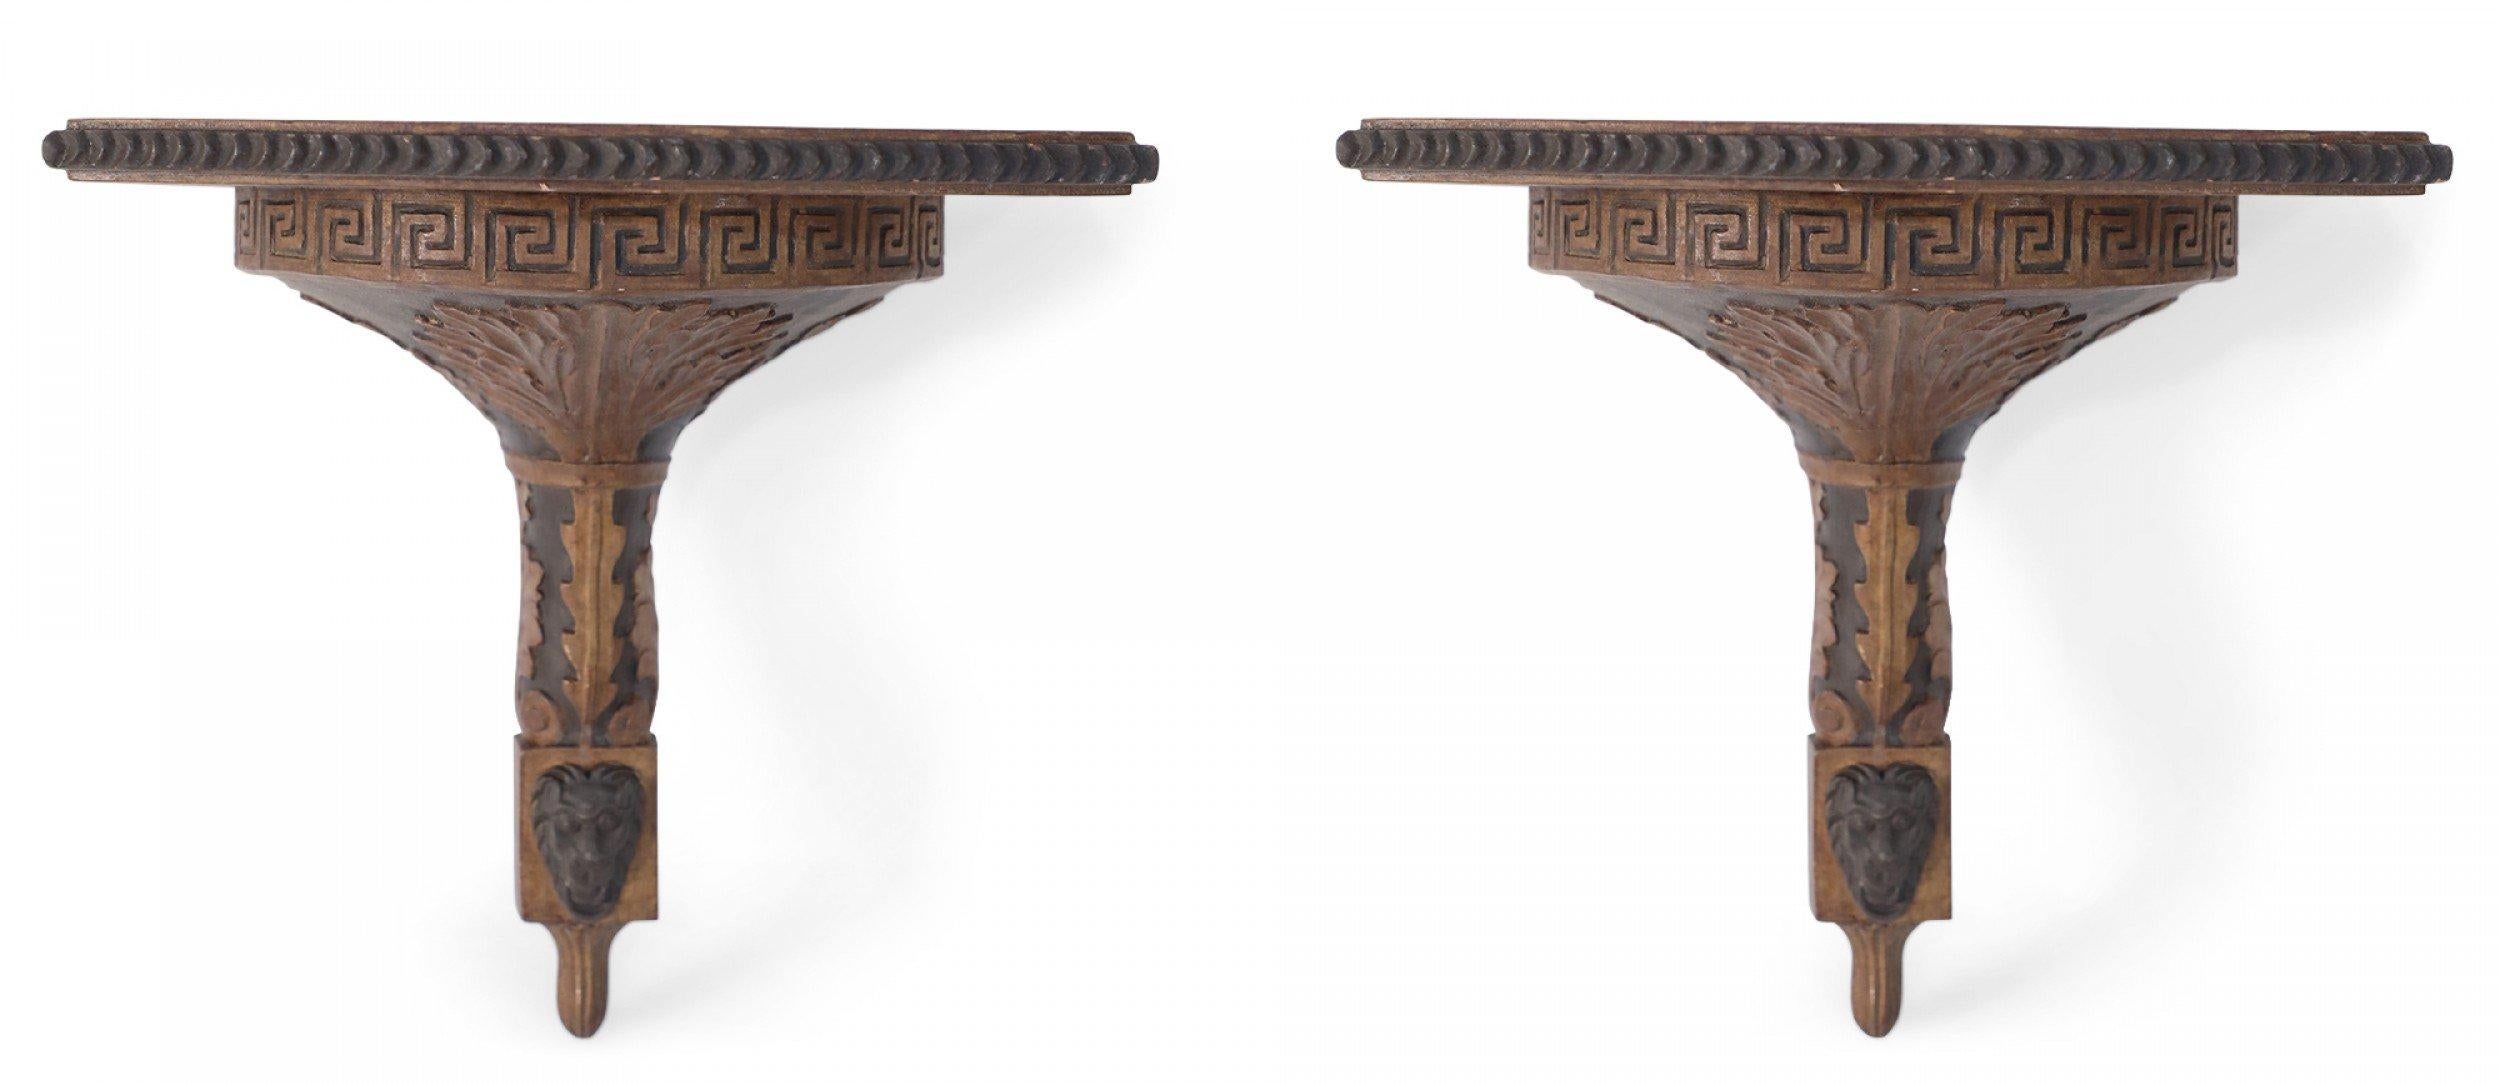 2 Pairs of Neo-Classical Style Carved Greek Key and Acantus Leaf Design Wooden For Sale 5